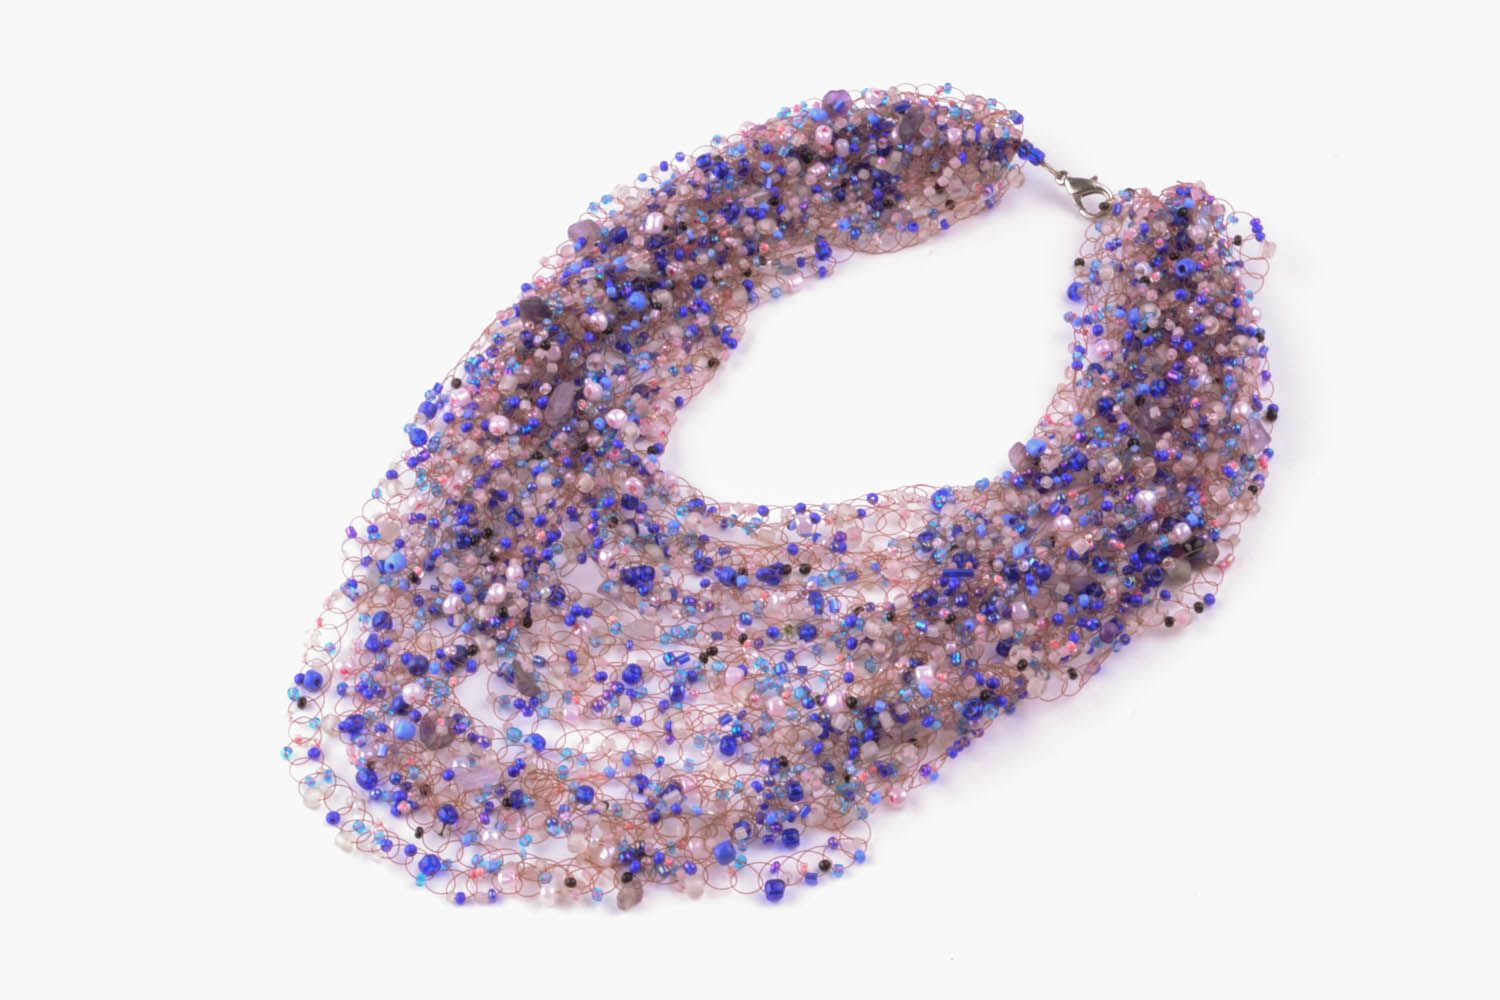 Violet necklace made of beads and natural stones photo 3